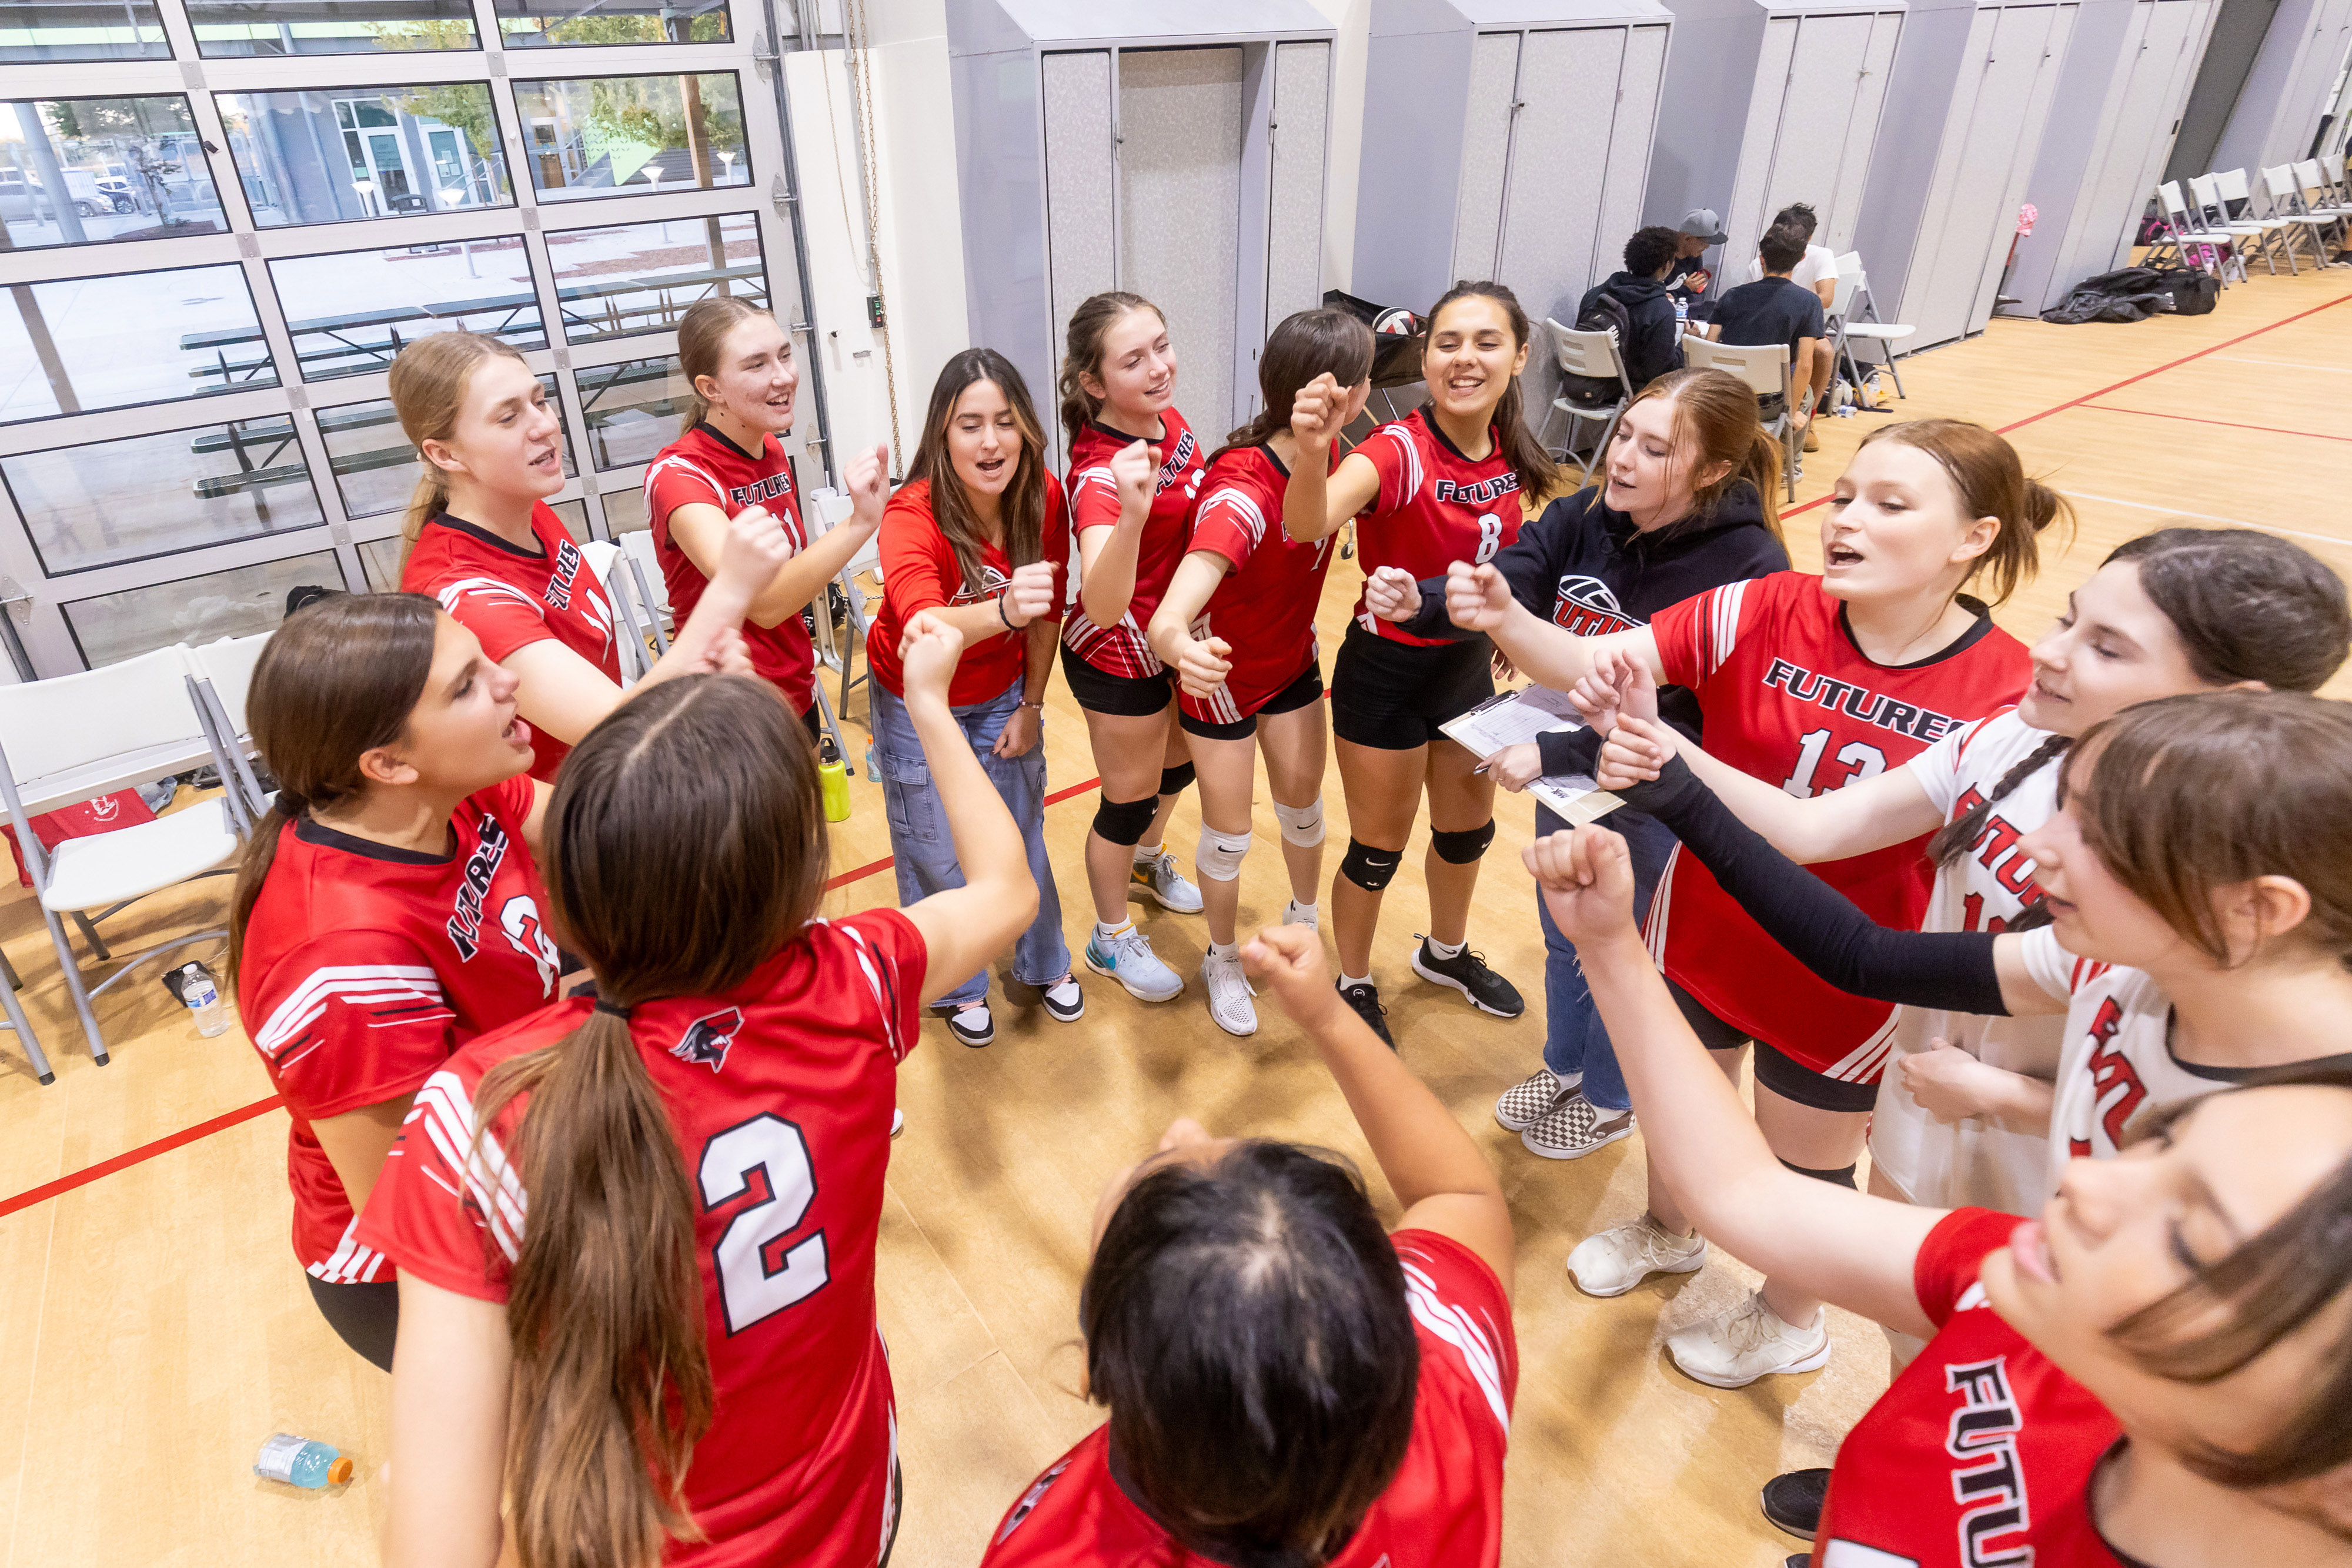 Girl's volleyball players in huddle